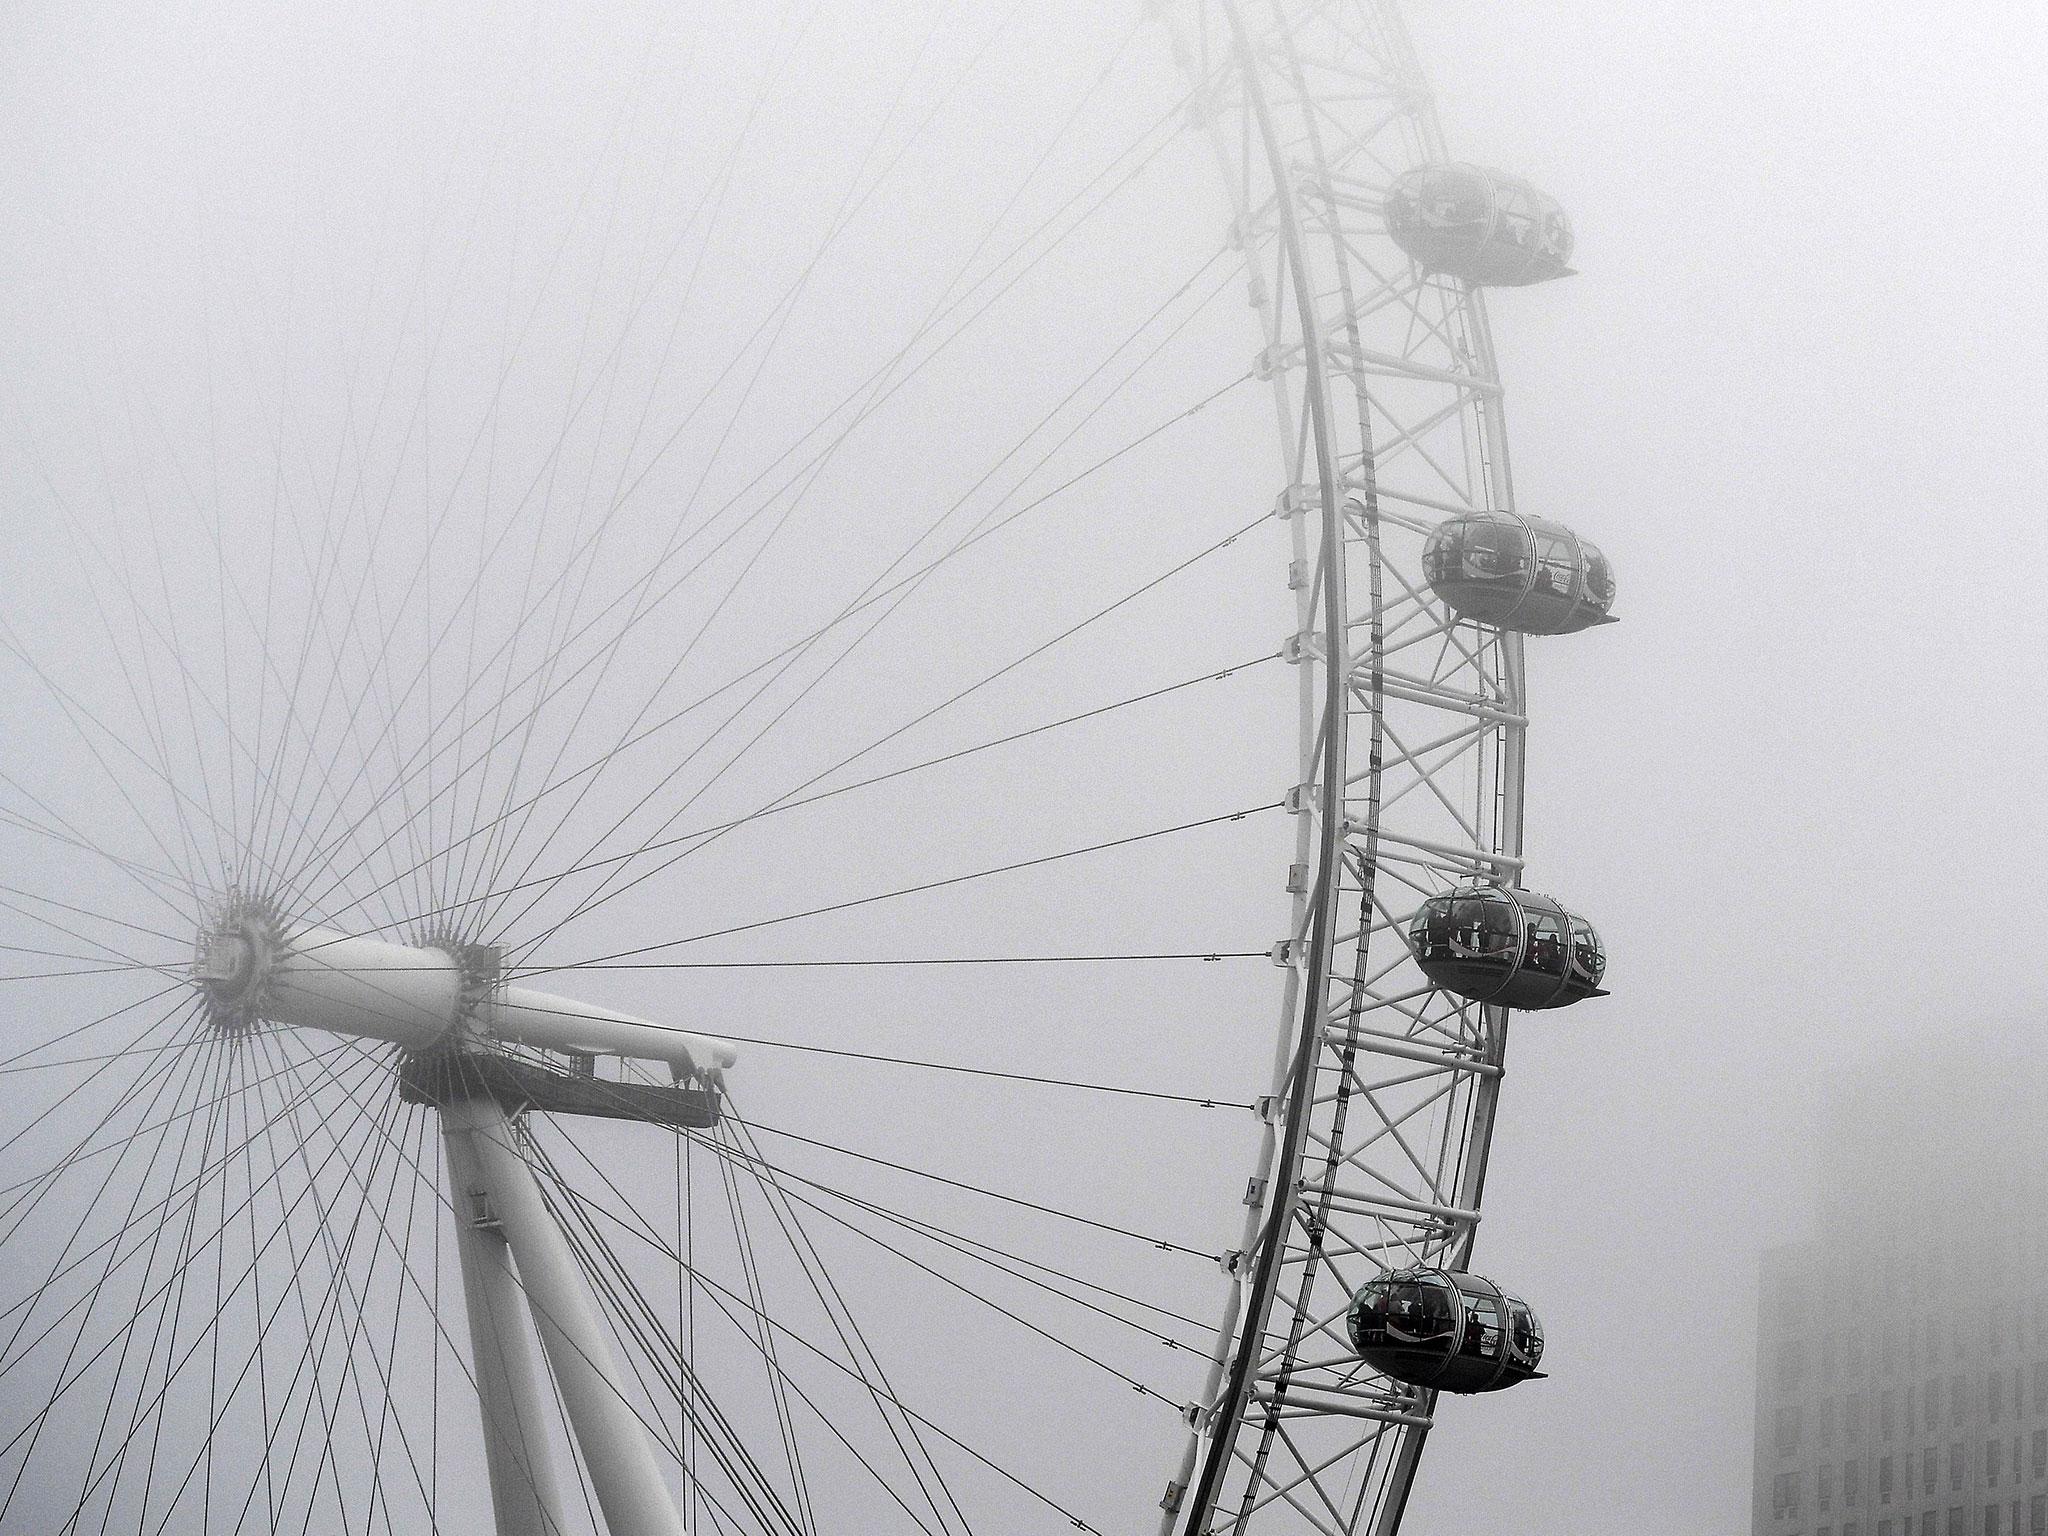 Heavy fog is expected to lift ahead of New Year's Eve fireworks displays